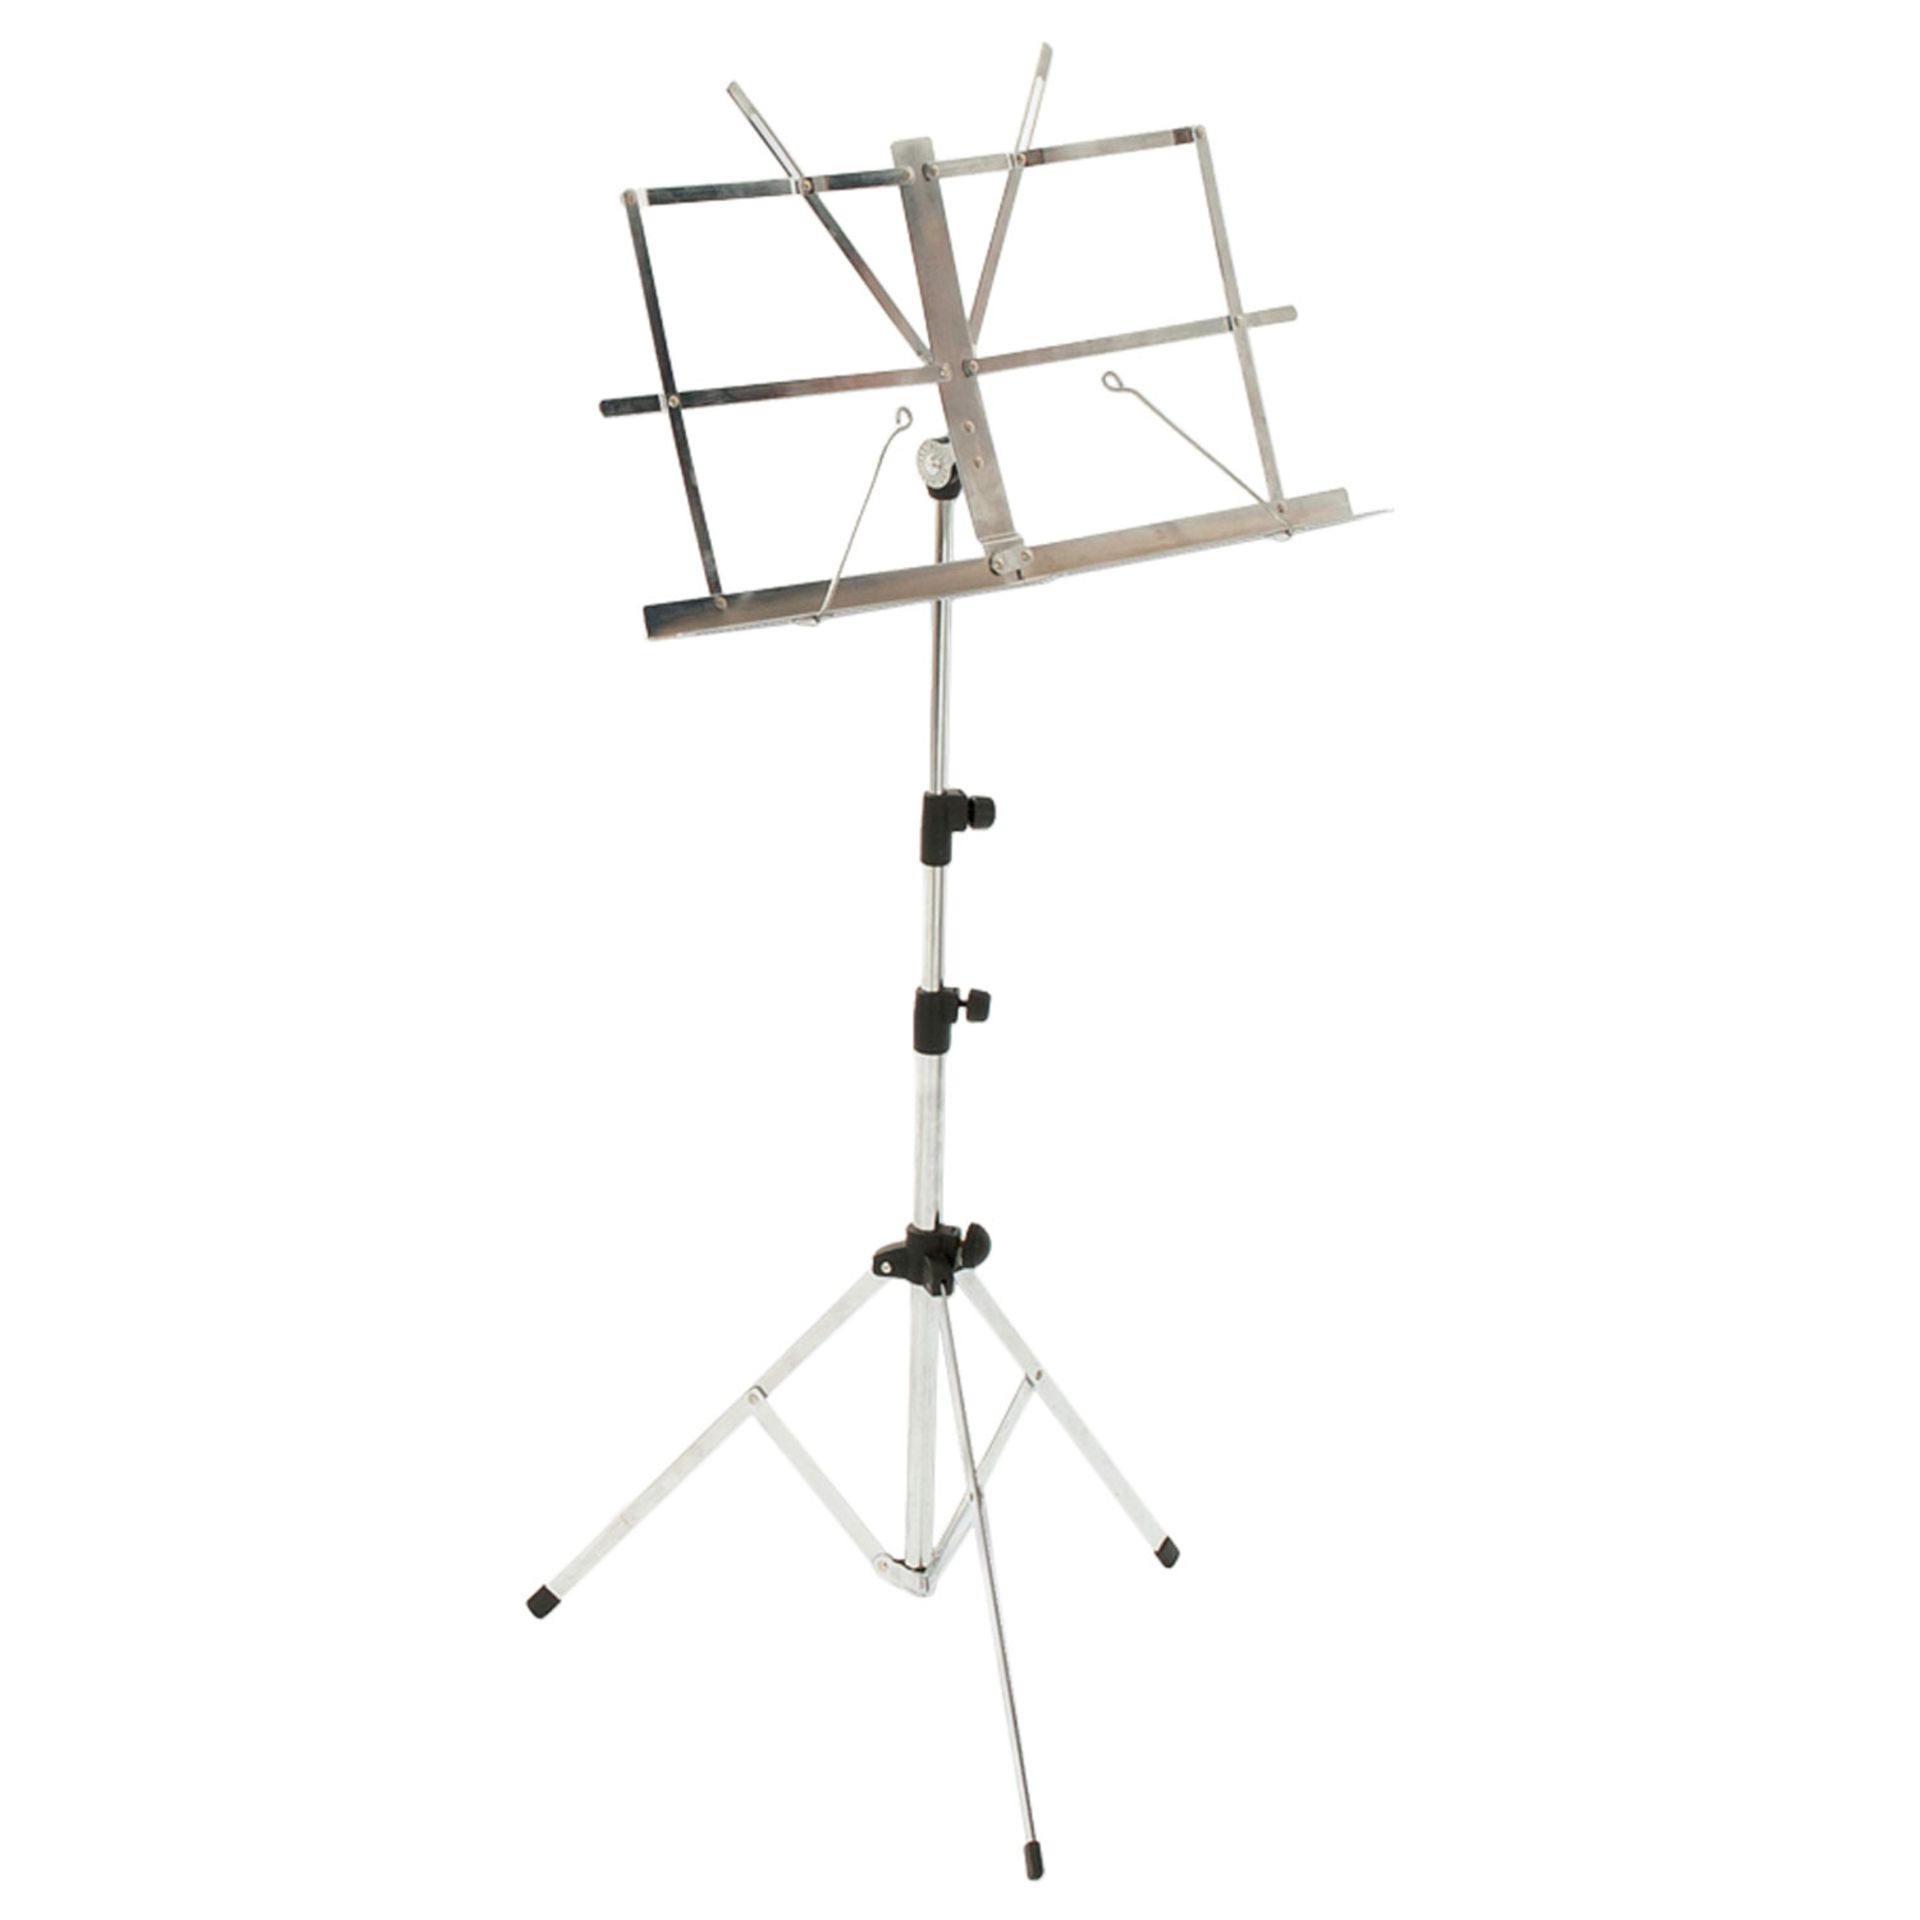 V Brand New Music Stand Black (Image Similar To Item) ISP £16 (Percussion Company)